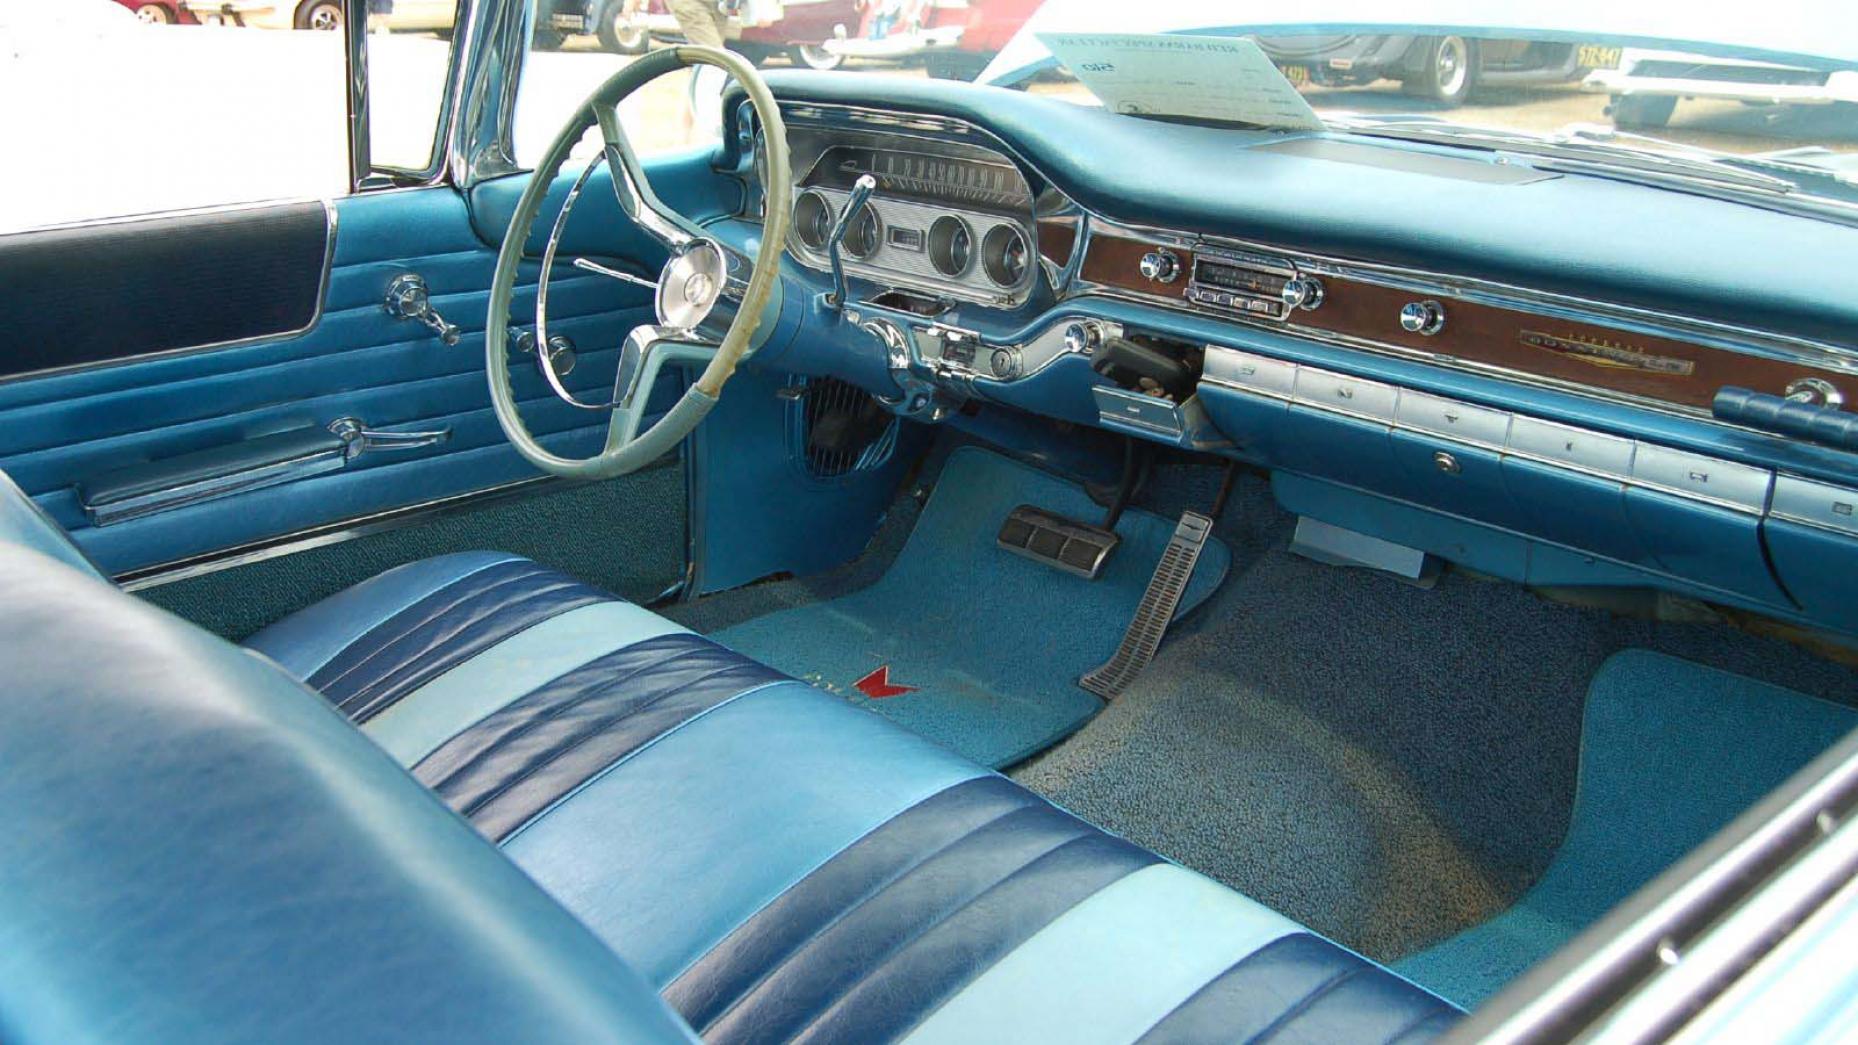 Top Gear's Top 9: the best classic car interior edition